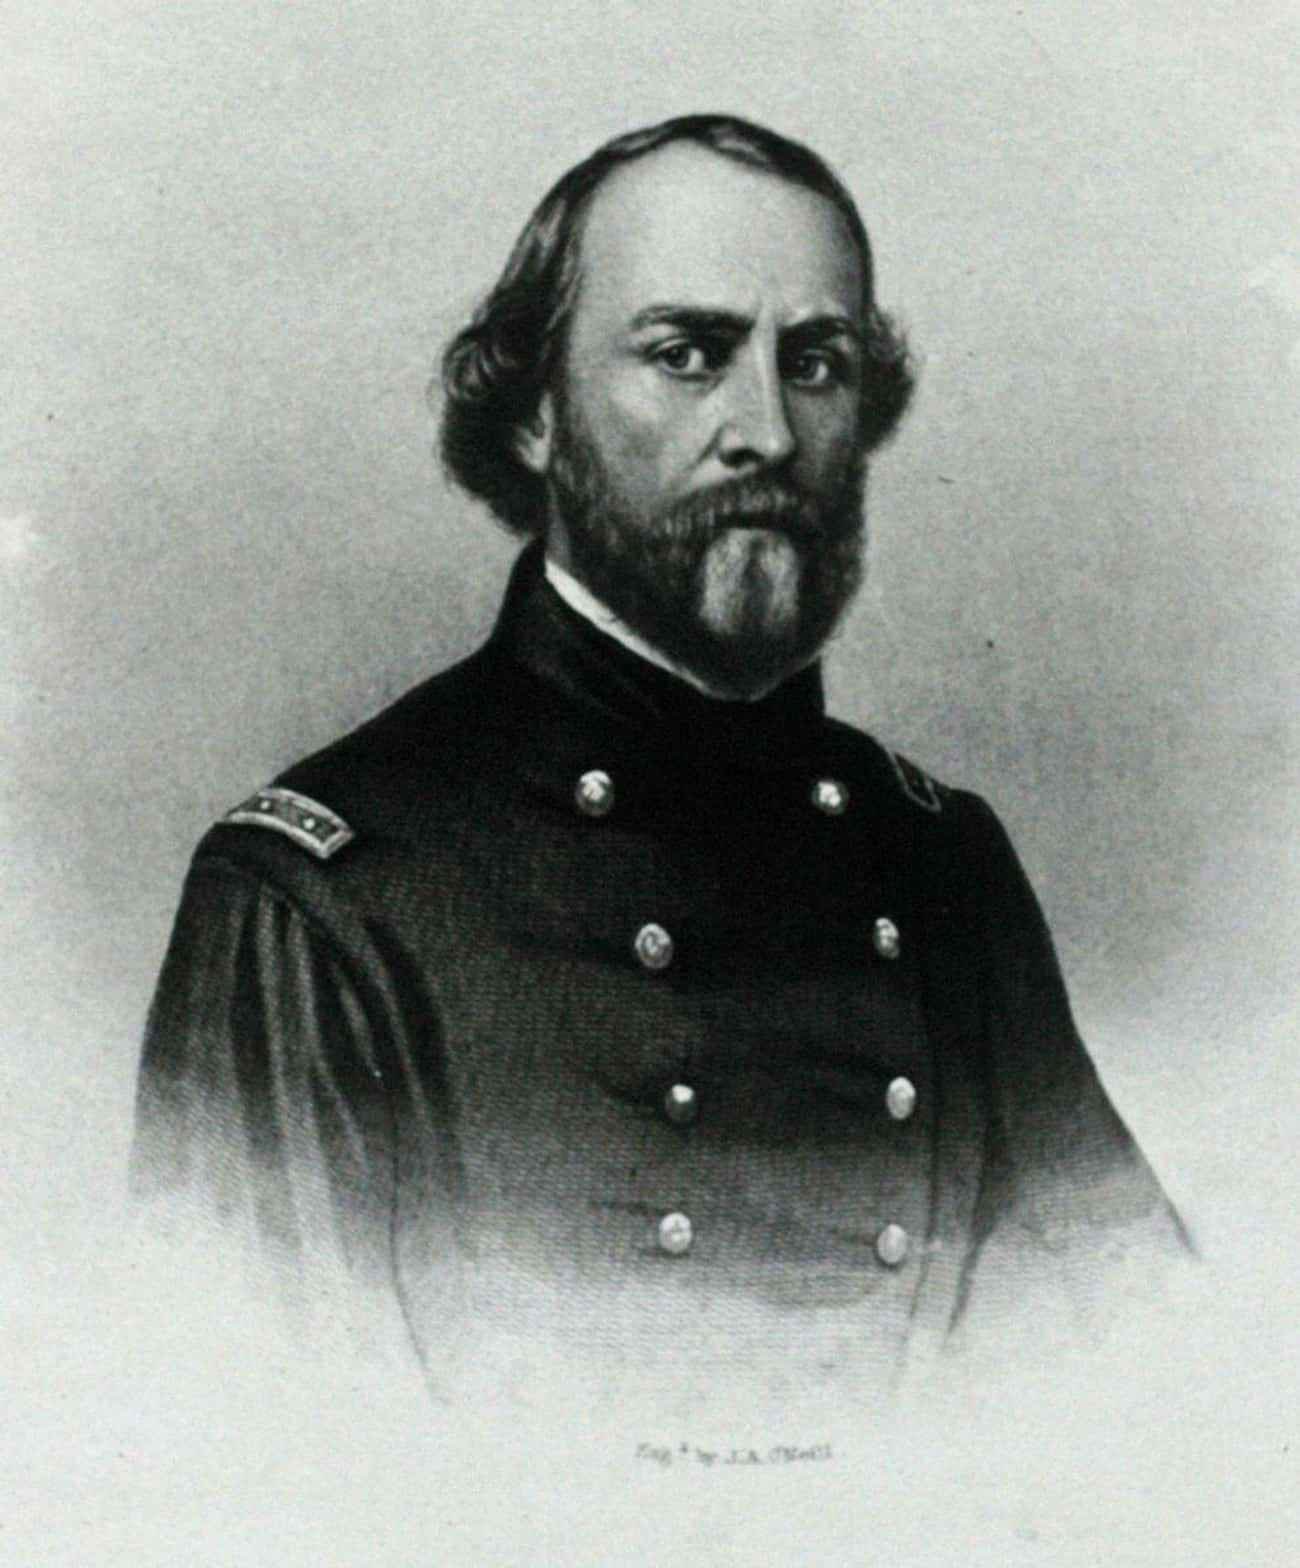 Civil War Major Sullivan Ballou Penned A Final Letter To His Wife Two Weeks Before He Was Killed In Battle